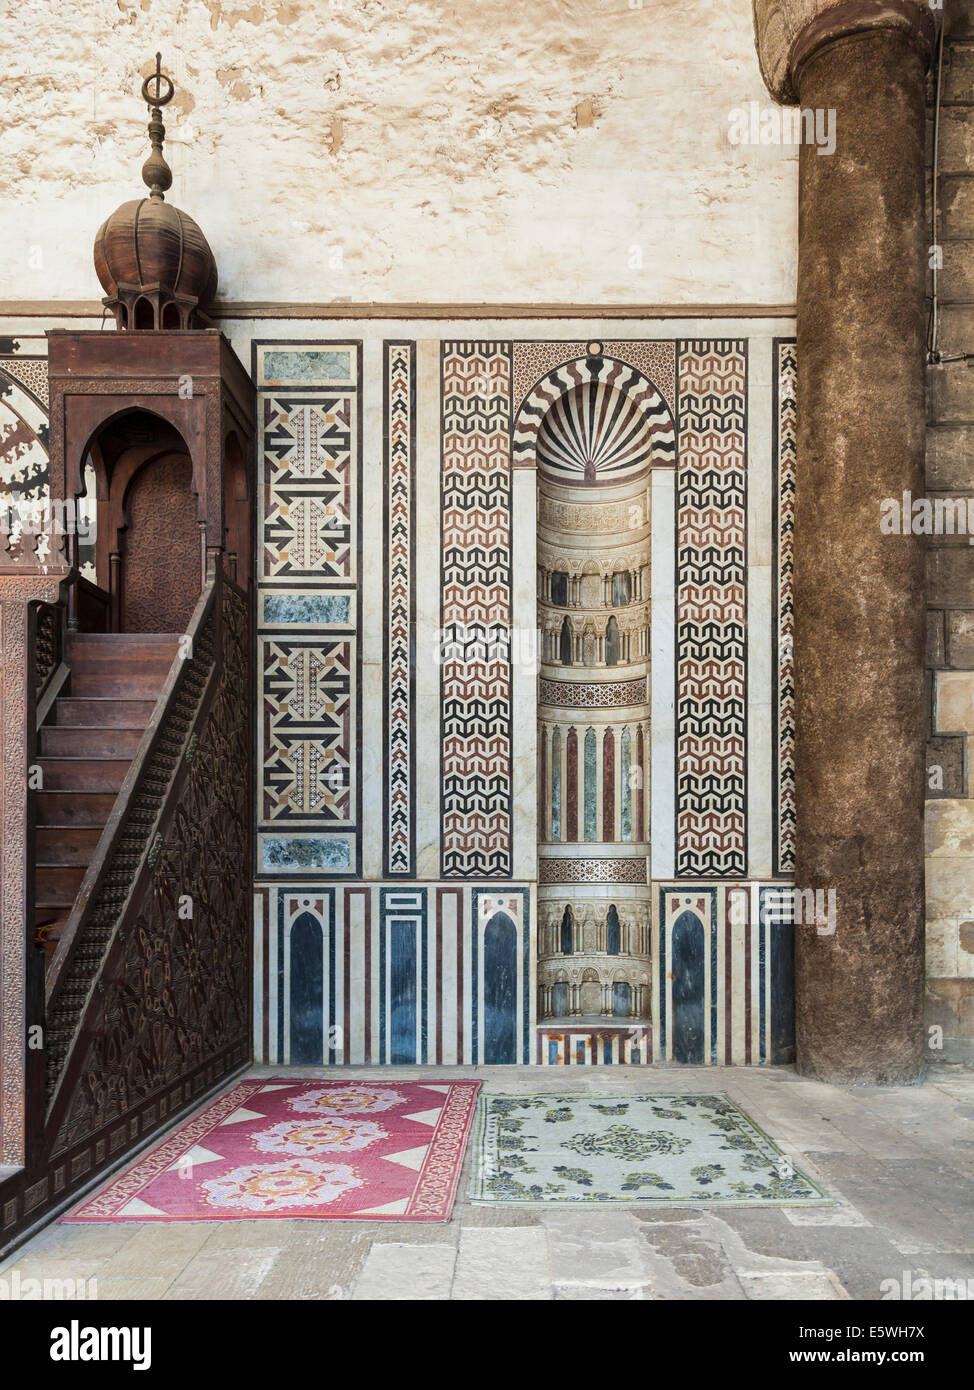 Minbar or pulpit in the Alabaster Mosque or Mosque of Muhammad Ali Pasha, Cairo, Egypt Stock Photo